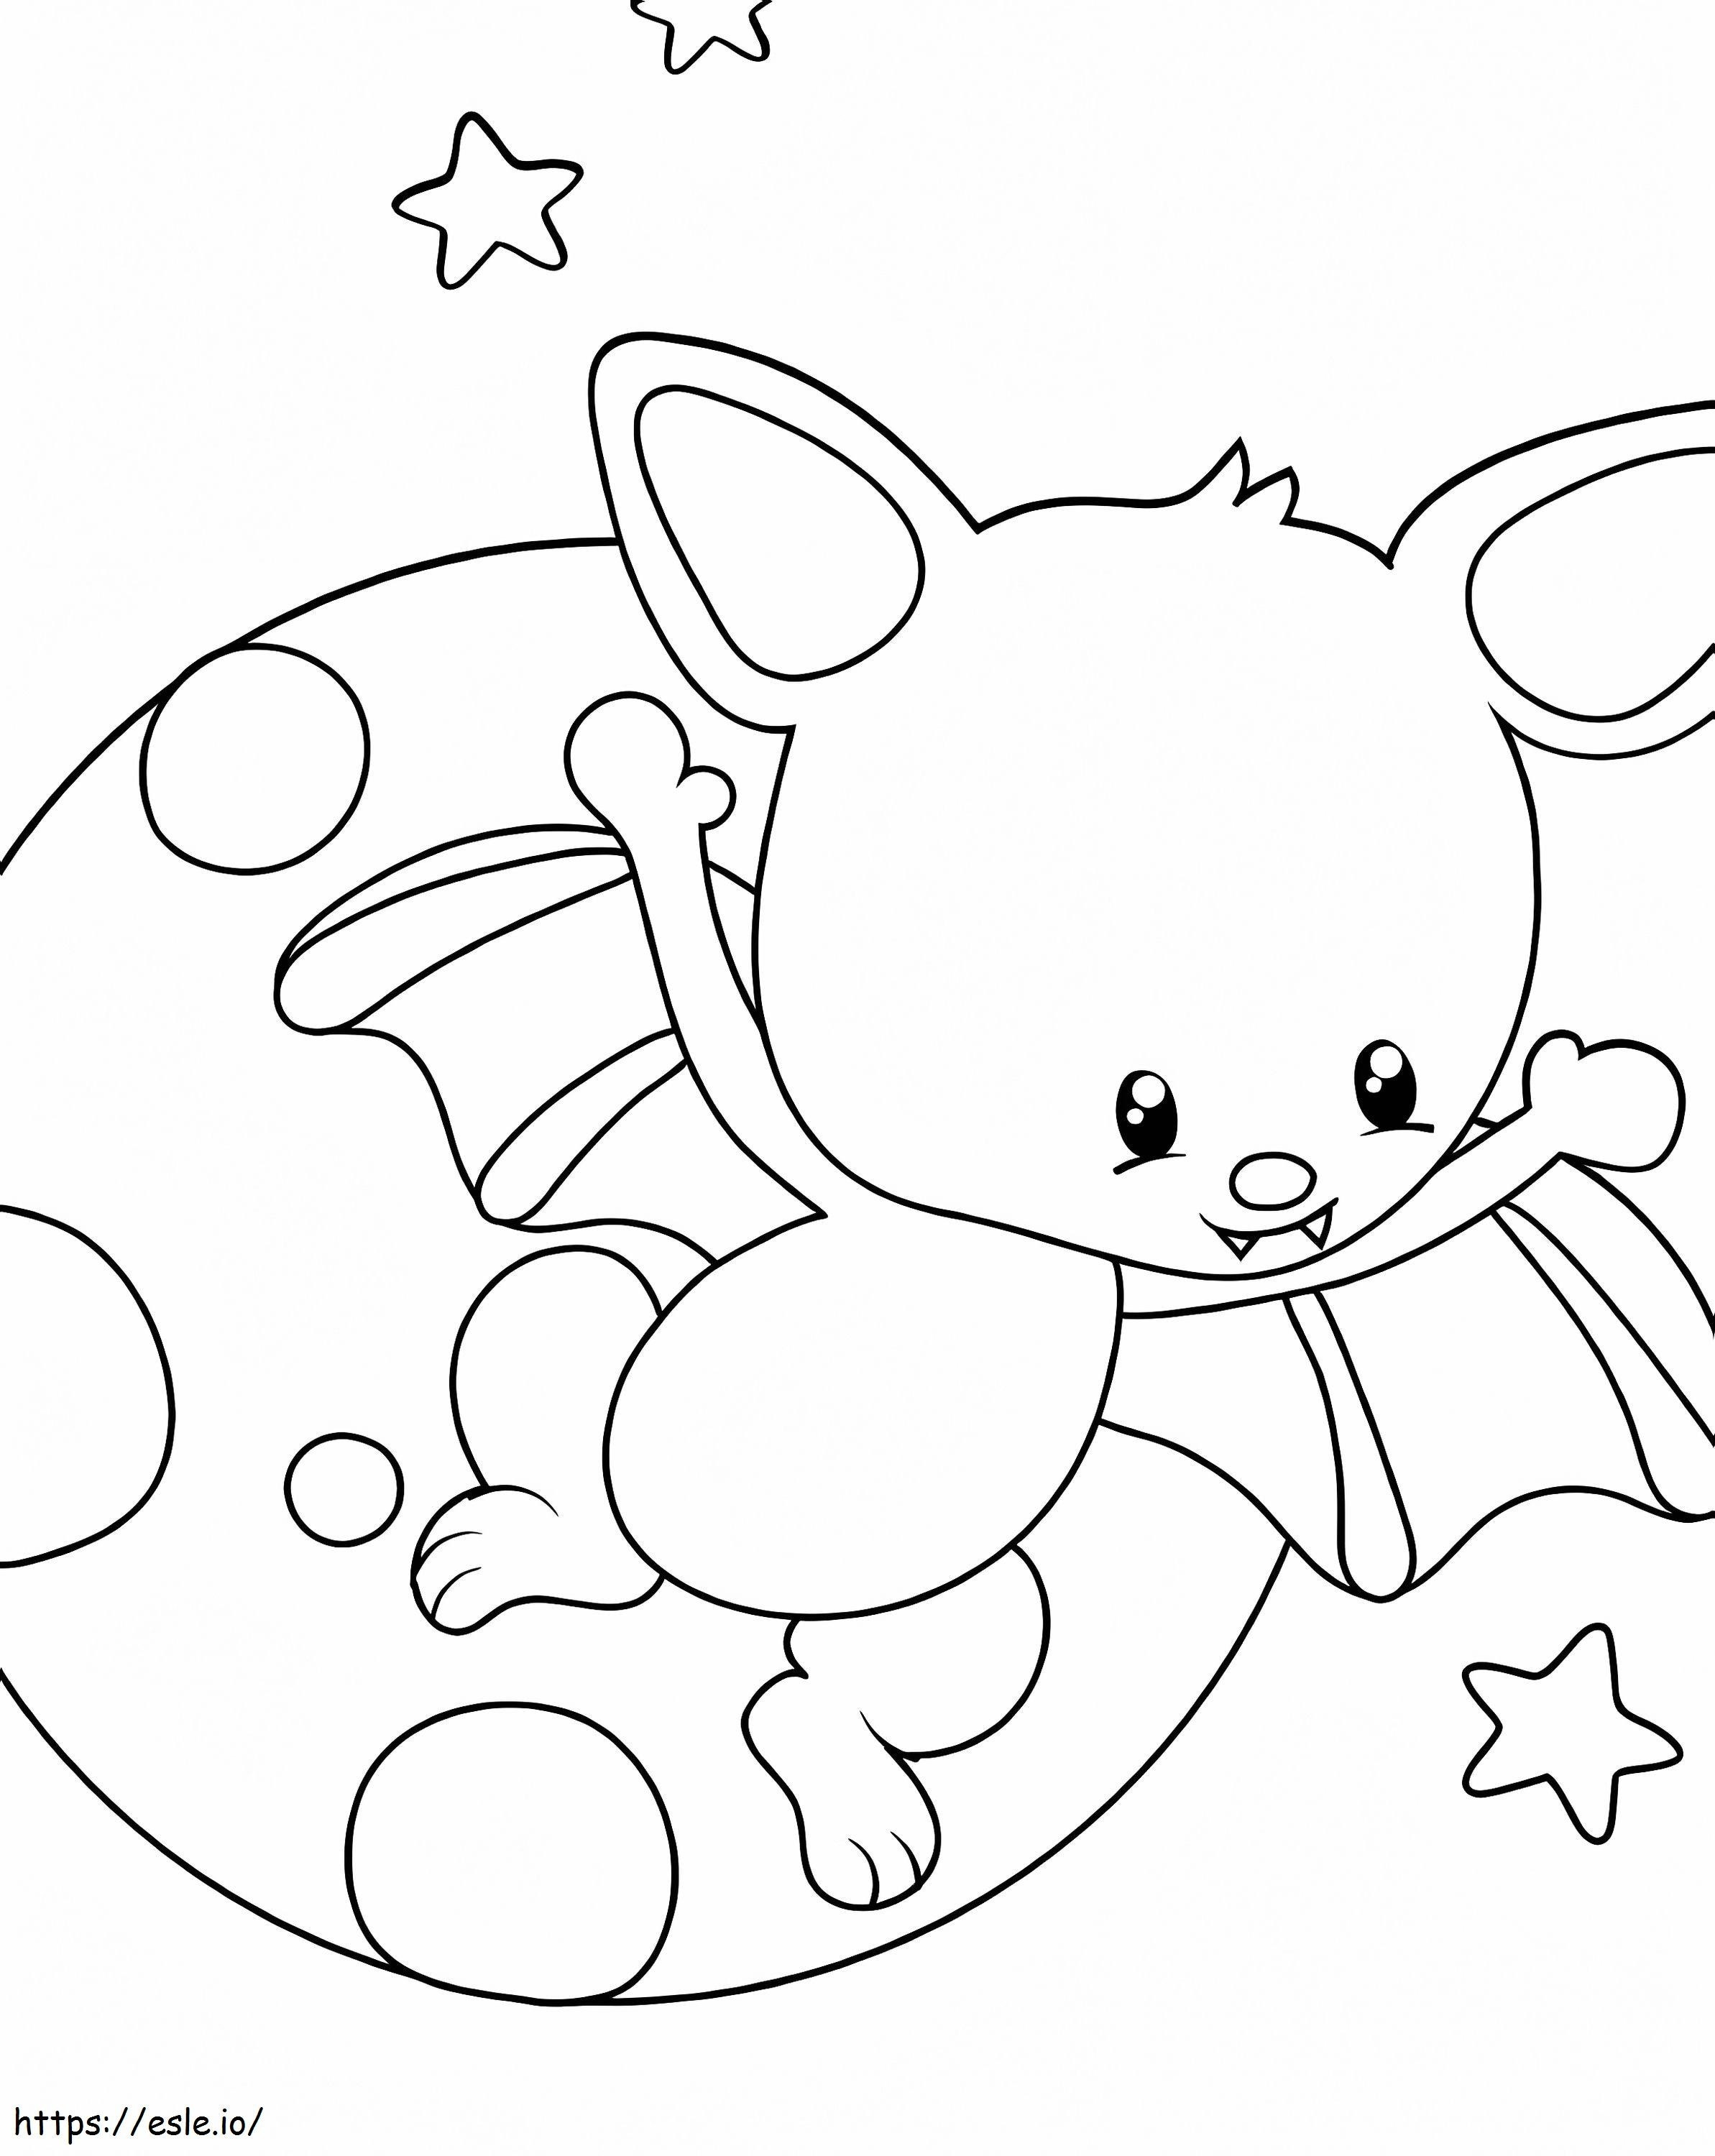 Awesome Bat coloring page